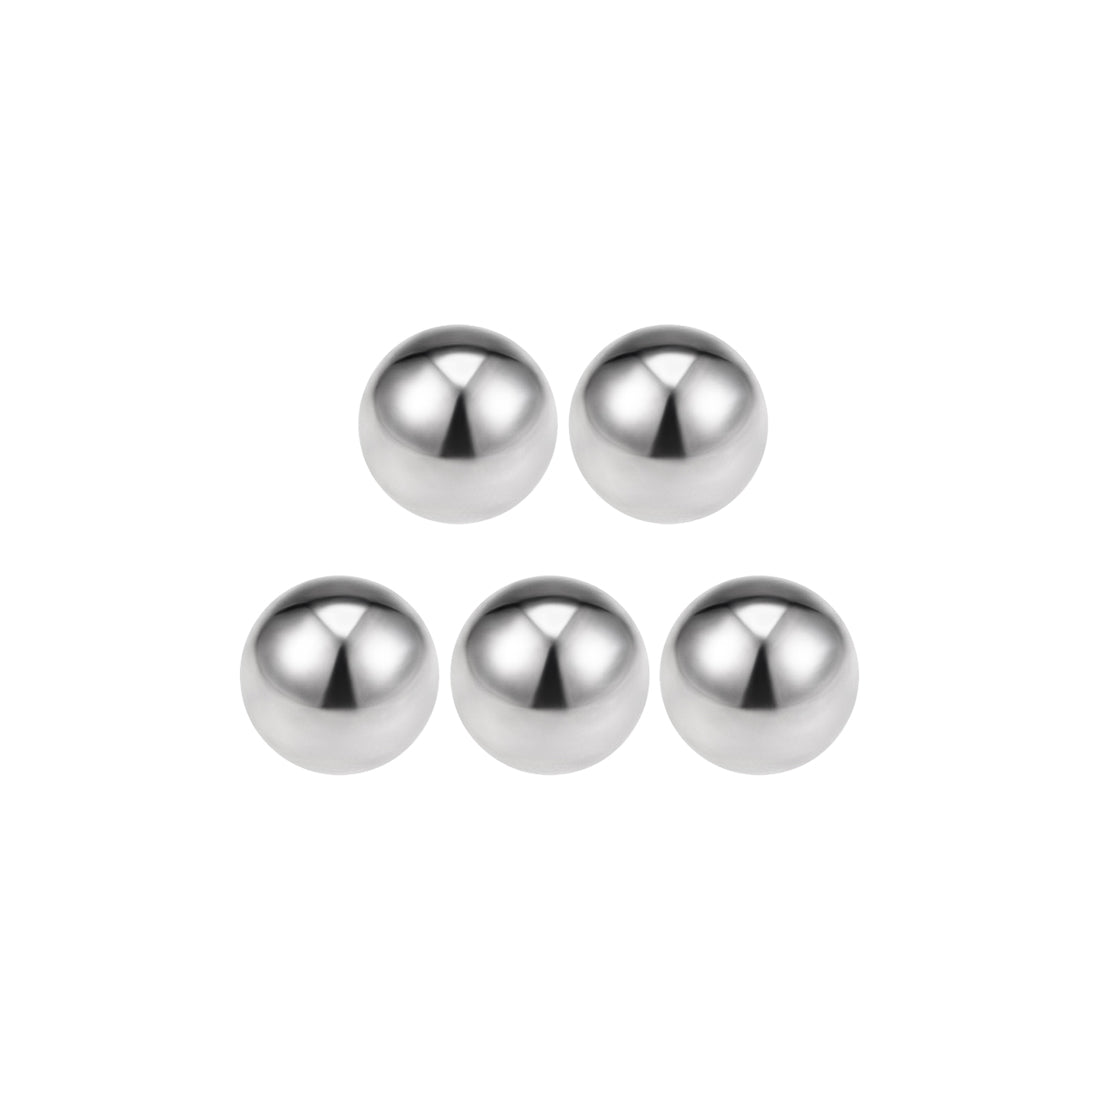 Uxcell Uxcell 1/2" Bearing Balls 304 Stainless Steel G100 Precision Balls 10pcs